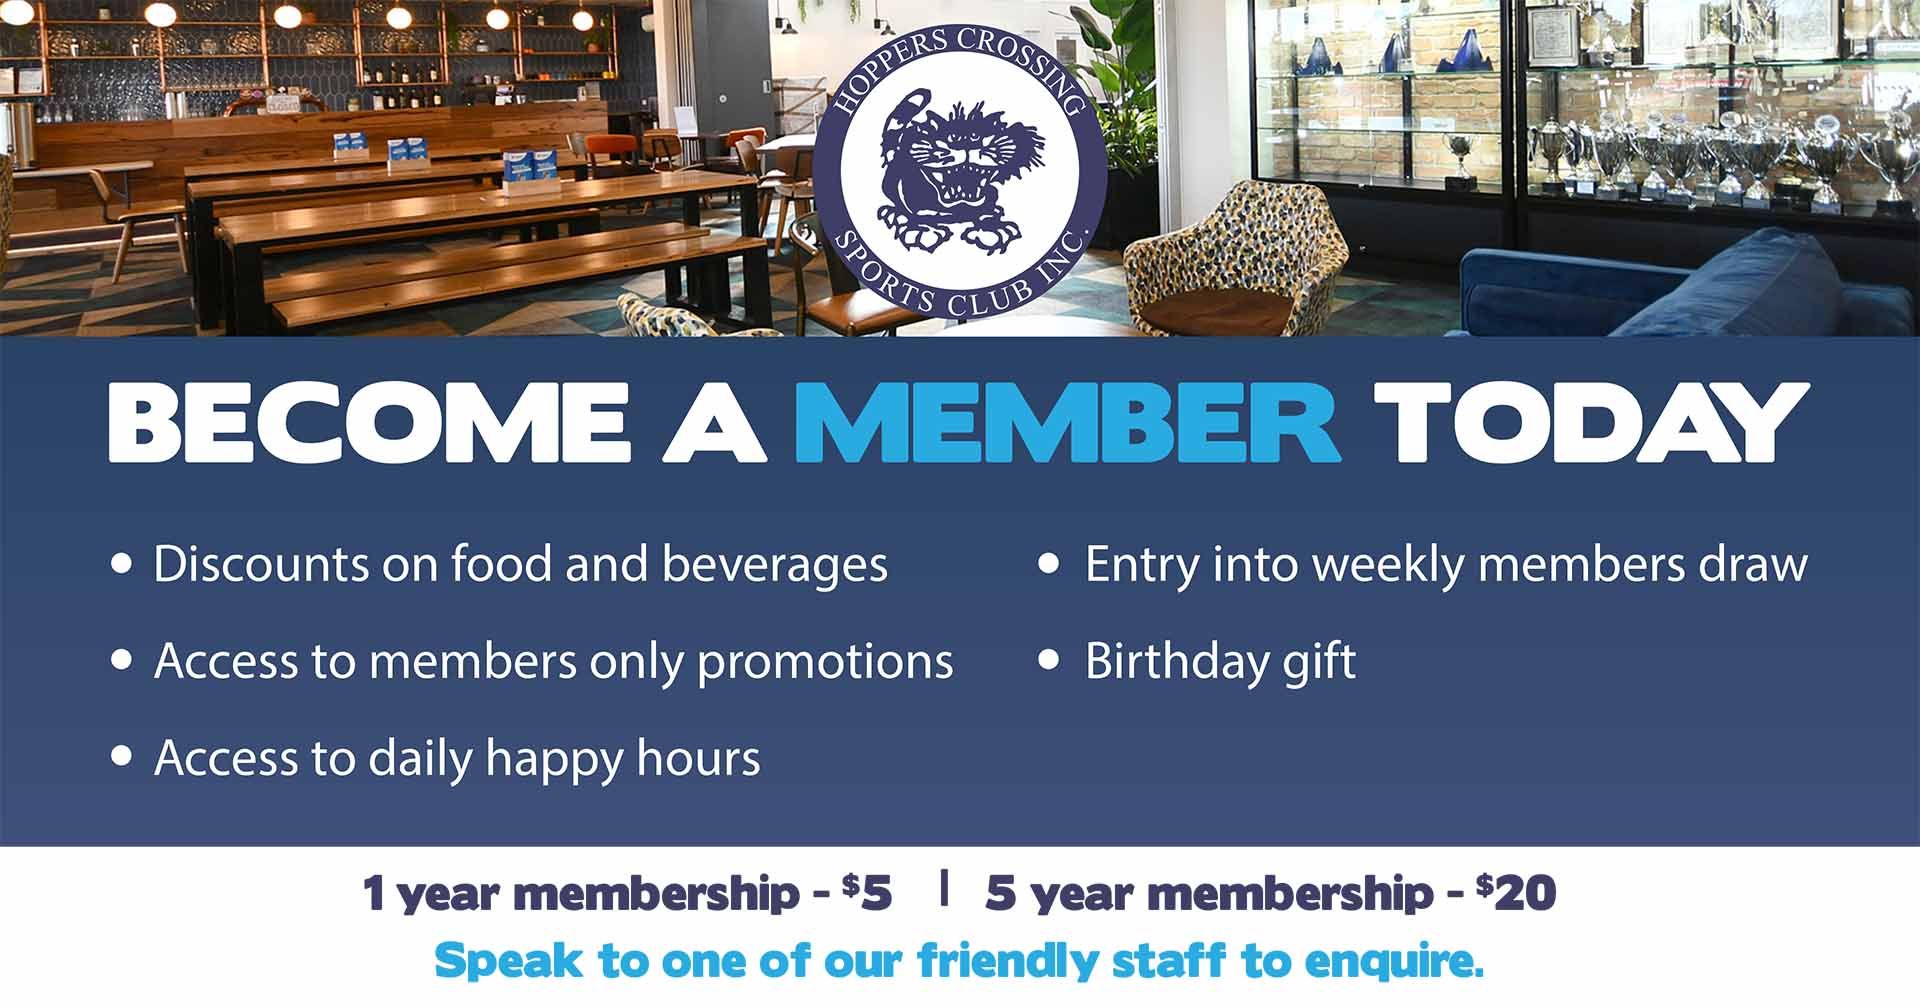 Become a Hoppers Crossing Sports Club member today.